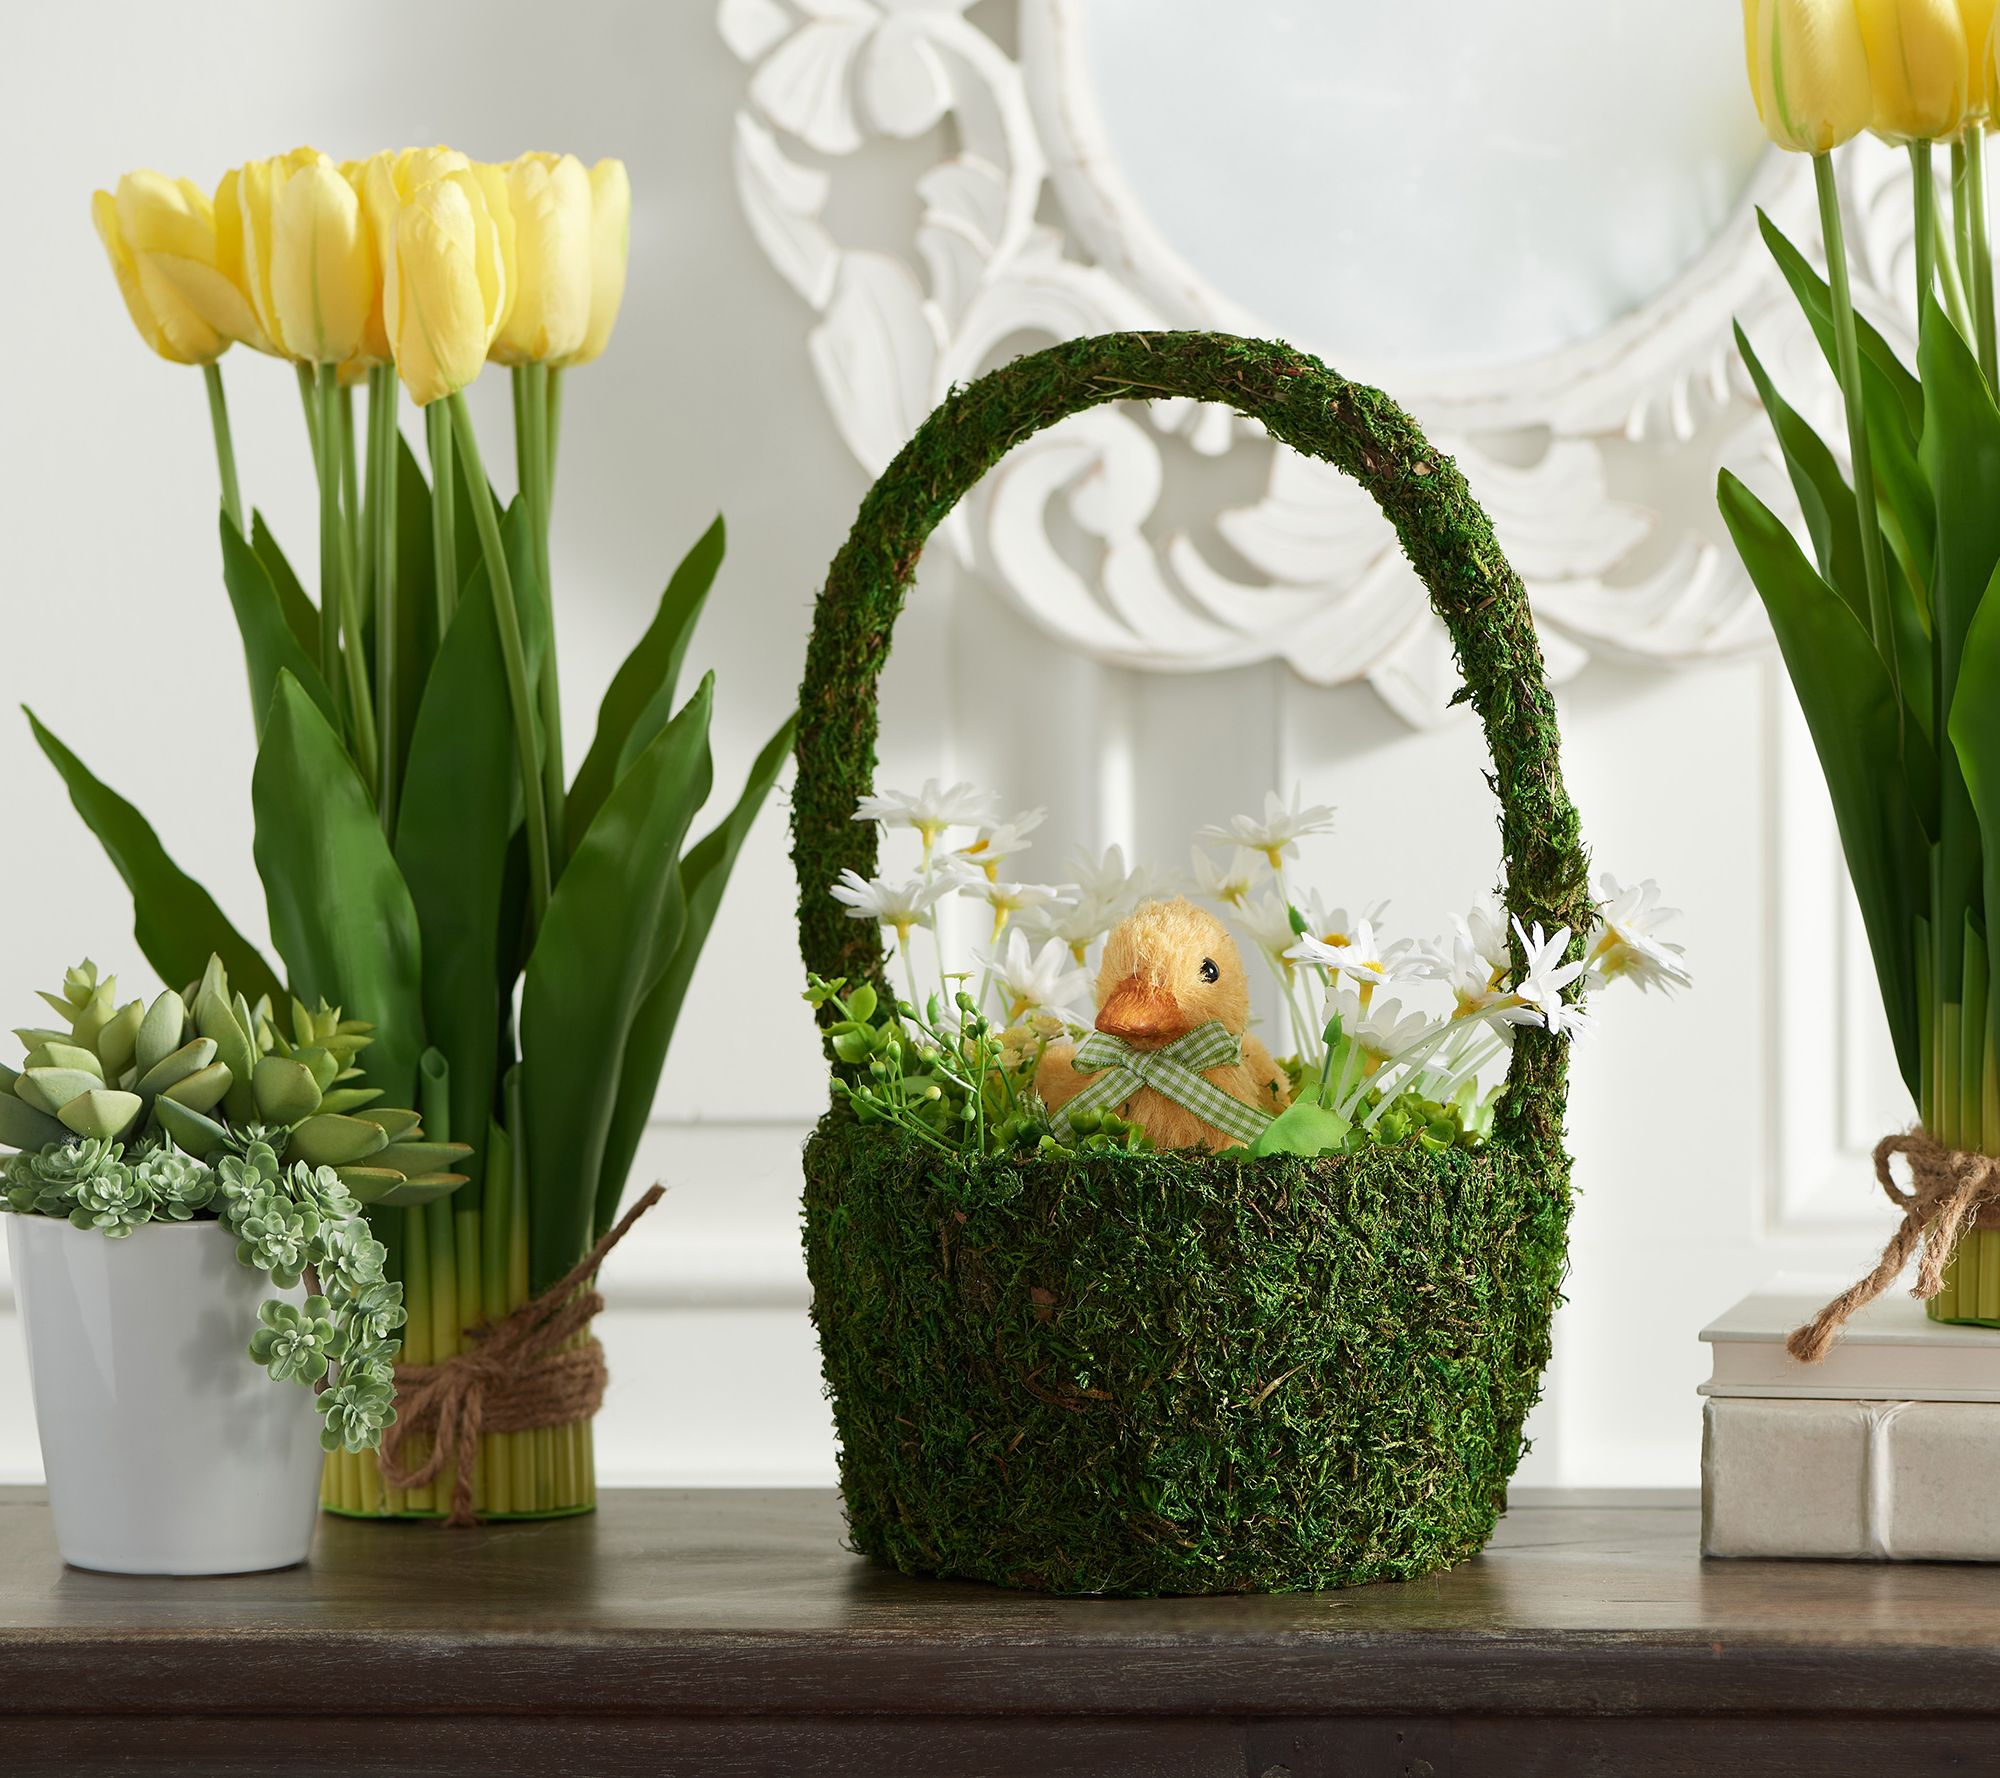 Moss Basket with Animal and Flowers by Valerie ,Duckling